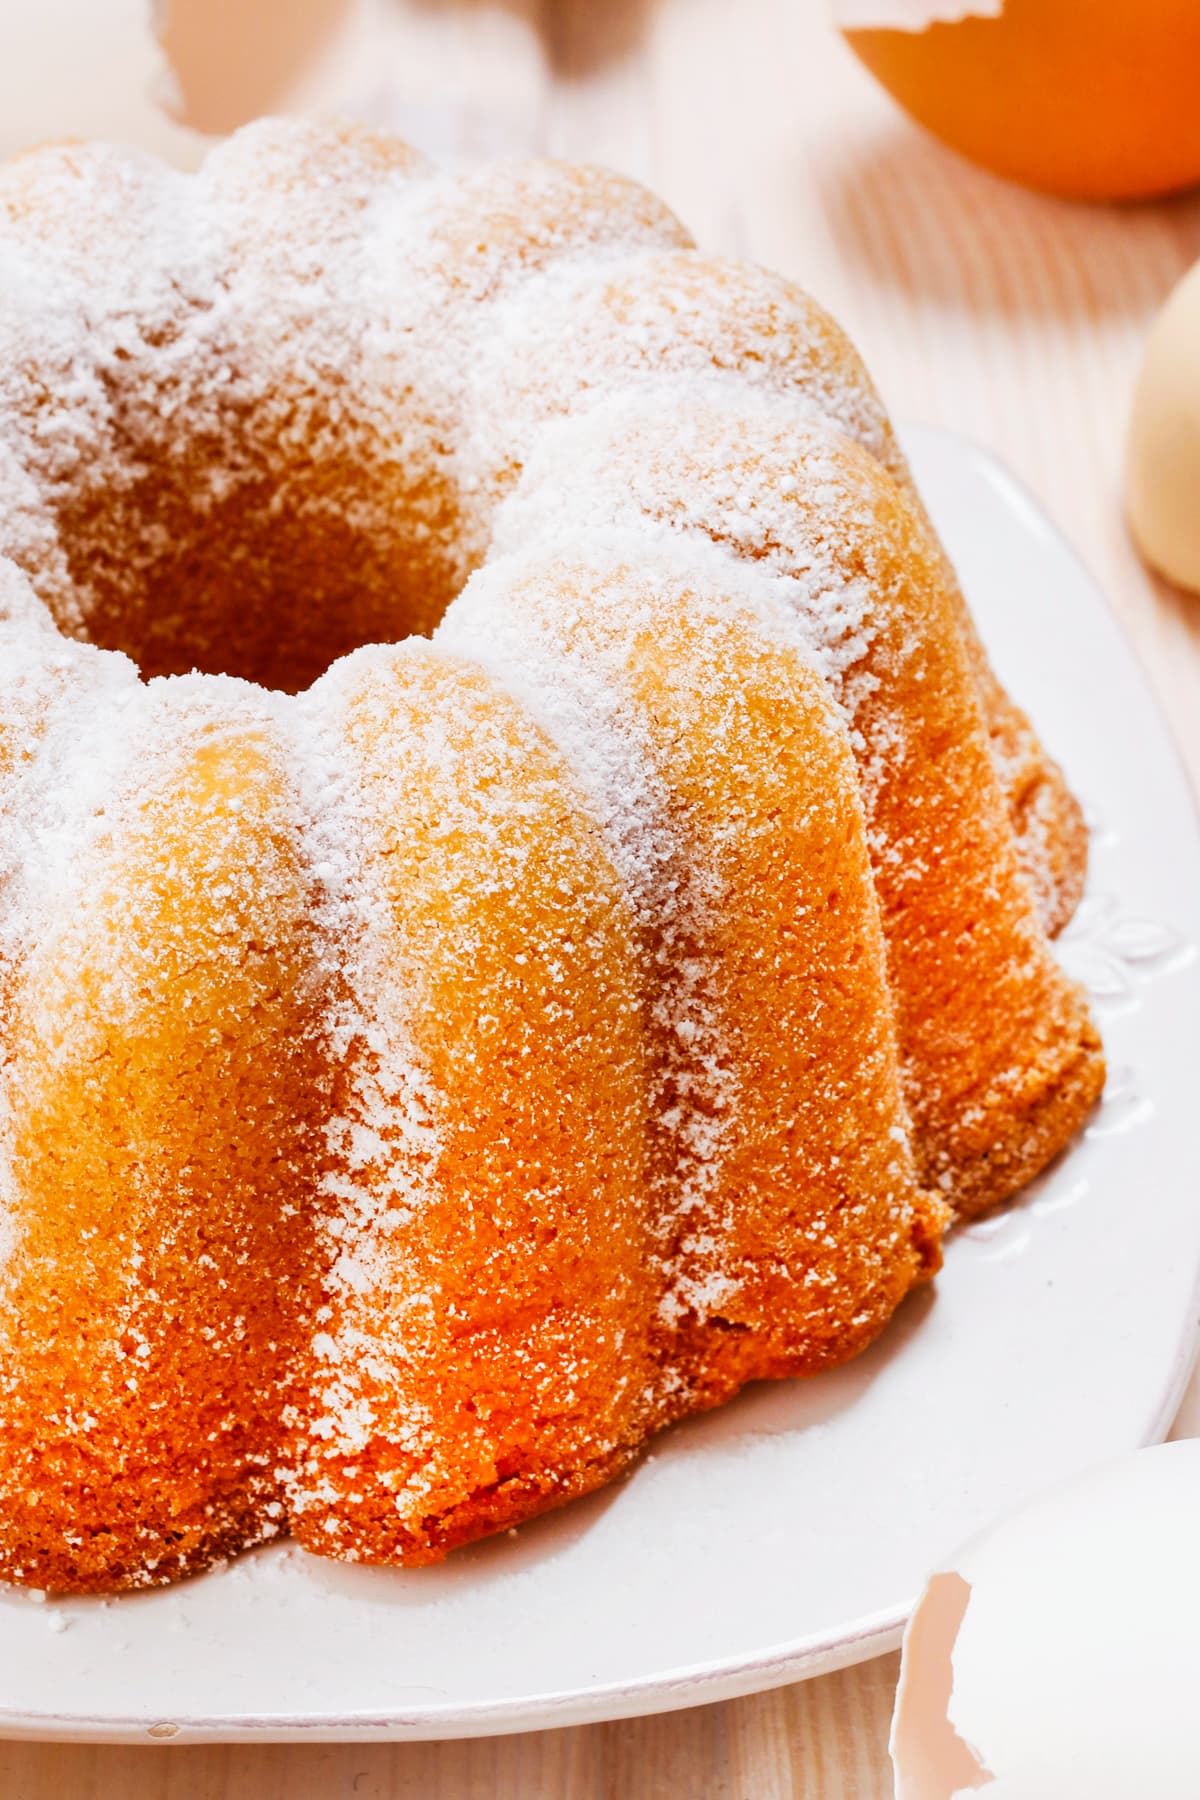 Traditional banana pound cake baked in a bundt pan.